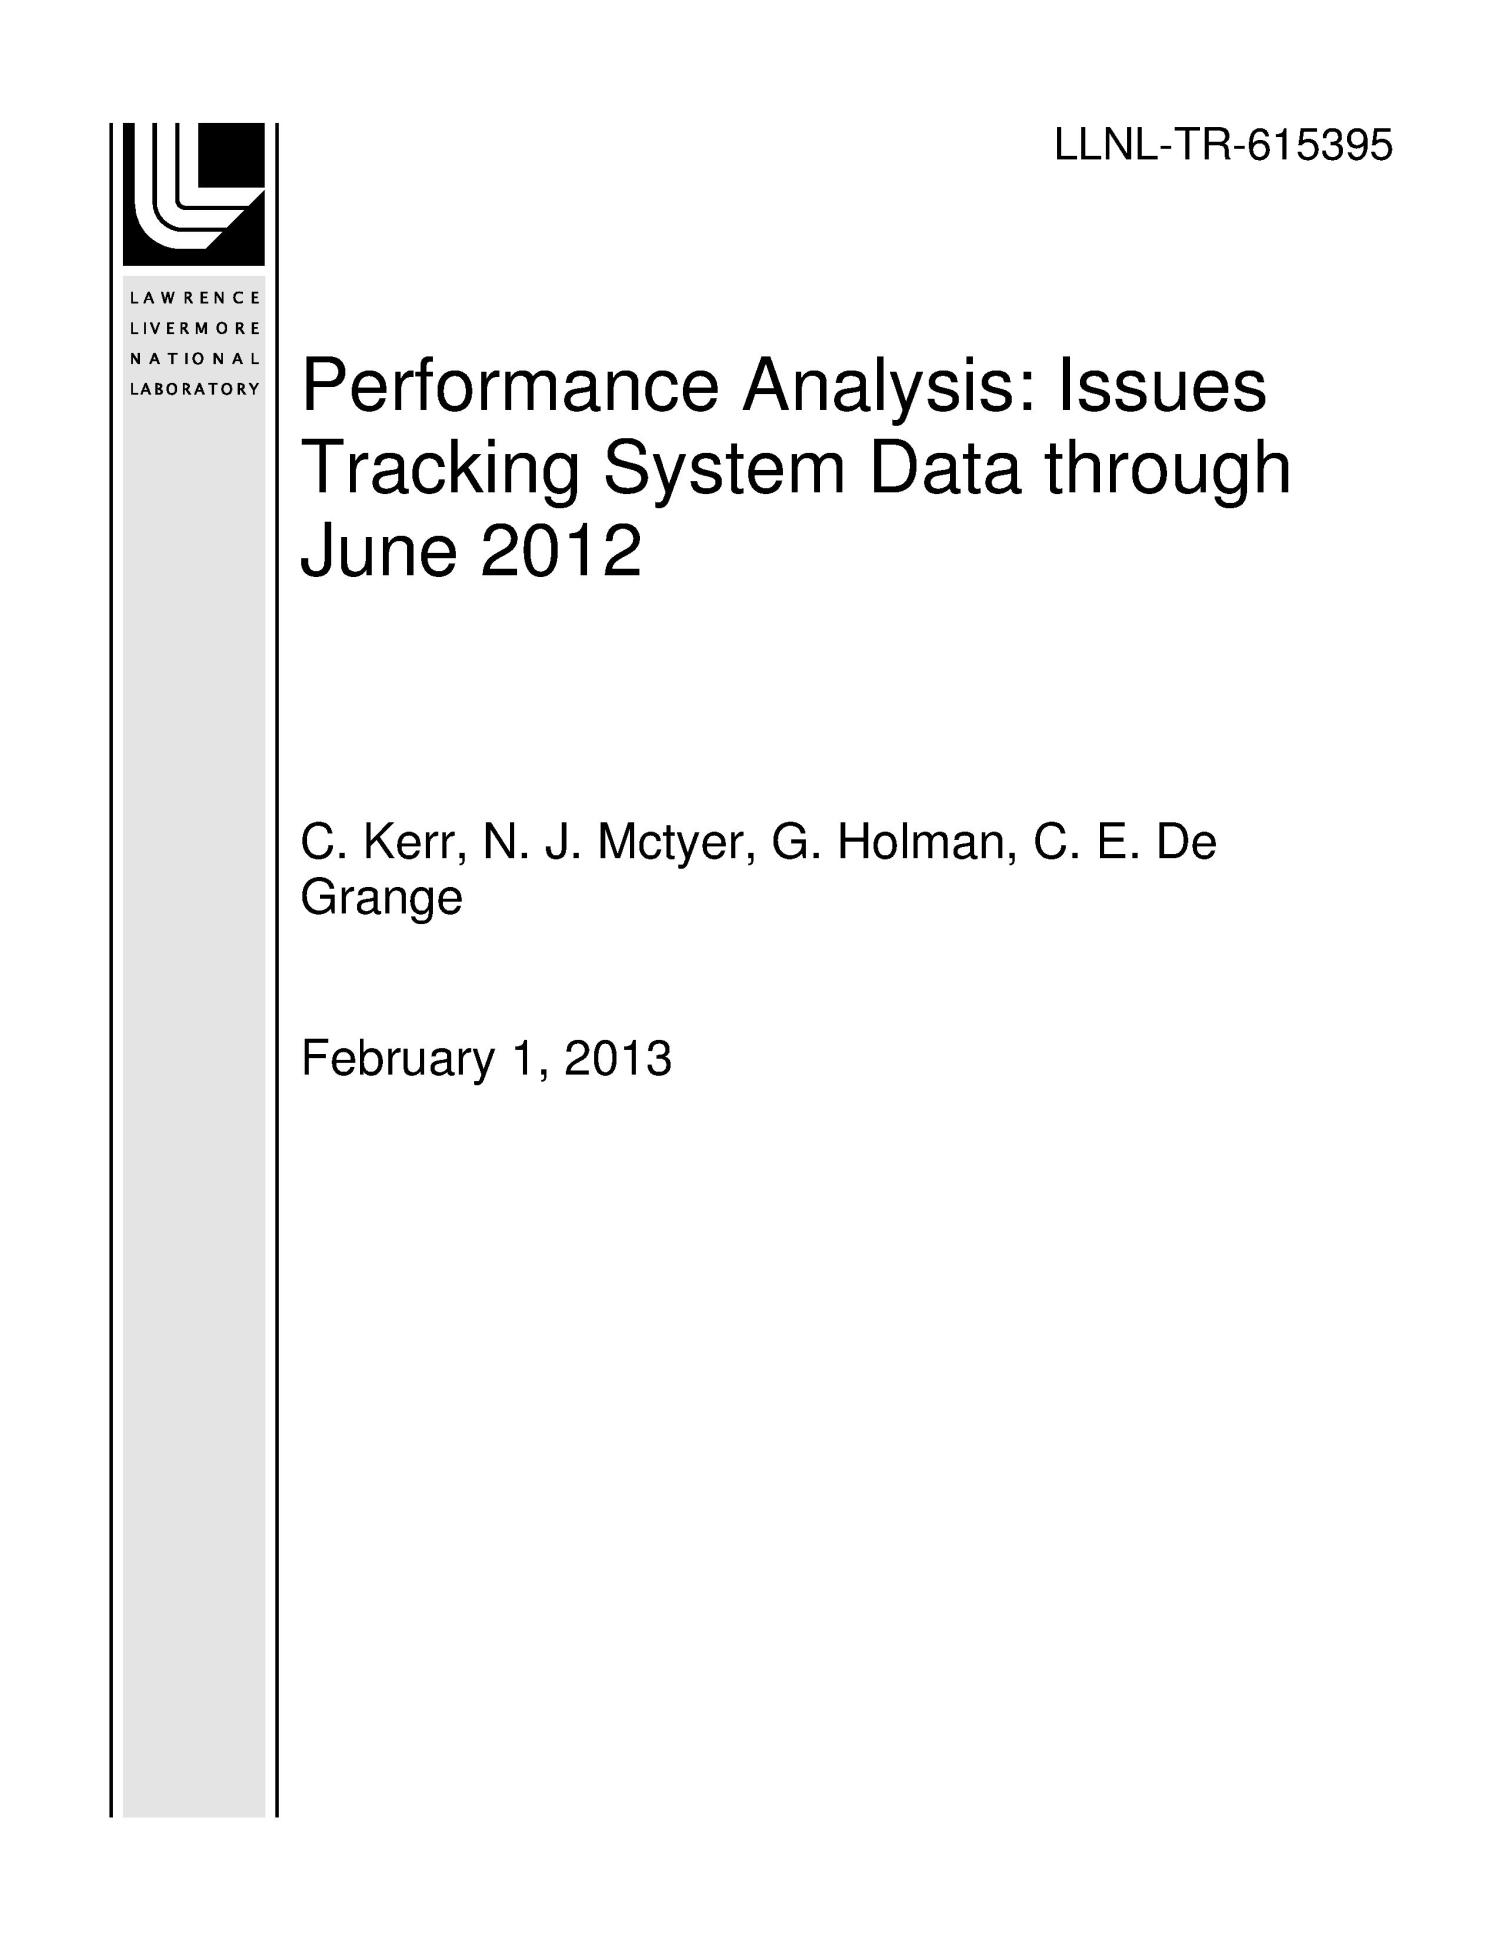 Performance Analysis: Issues Tracking System Data through June 2012
                                                
                                                    [Sequence #]: 1 of 79
                                                